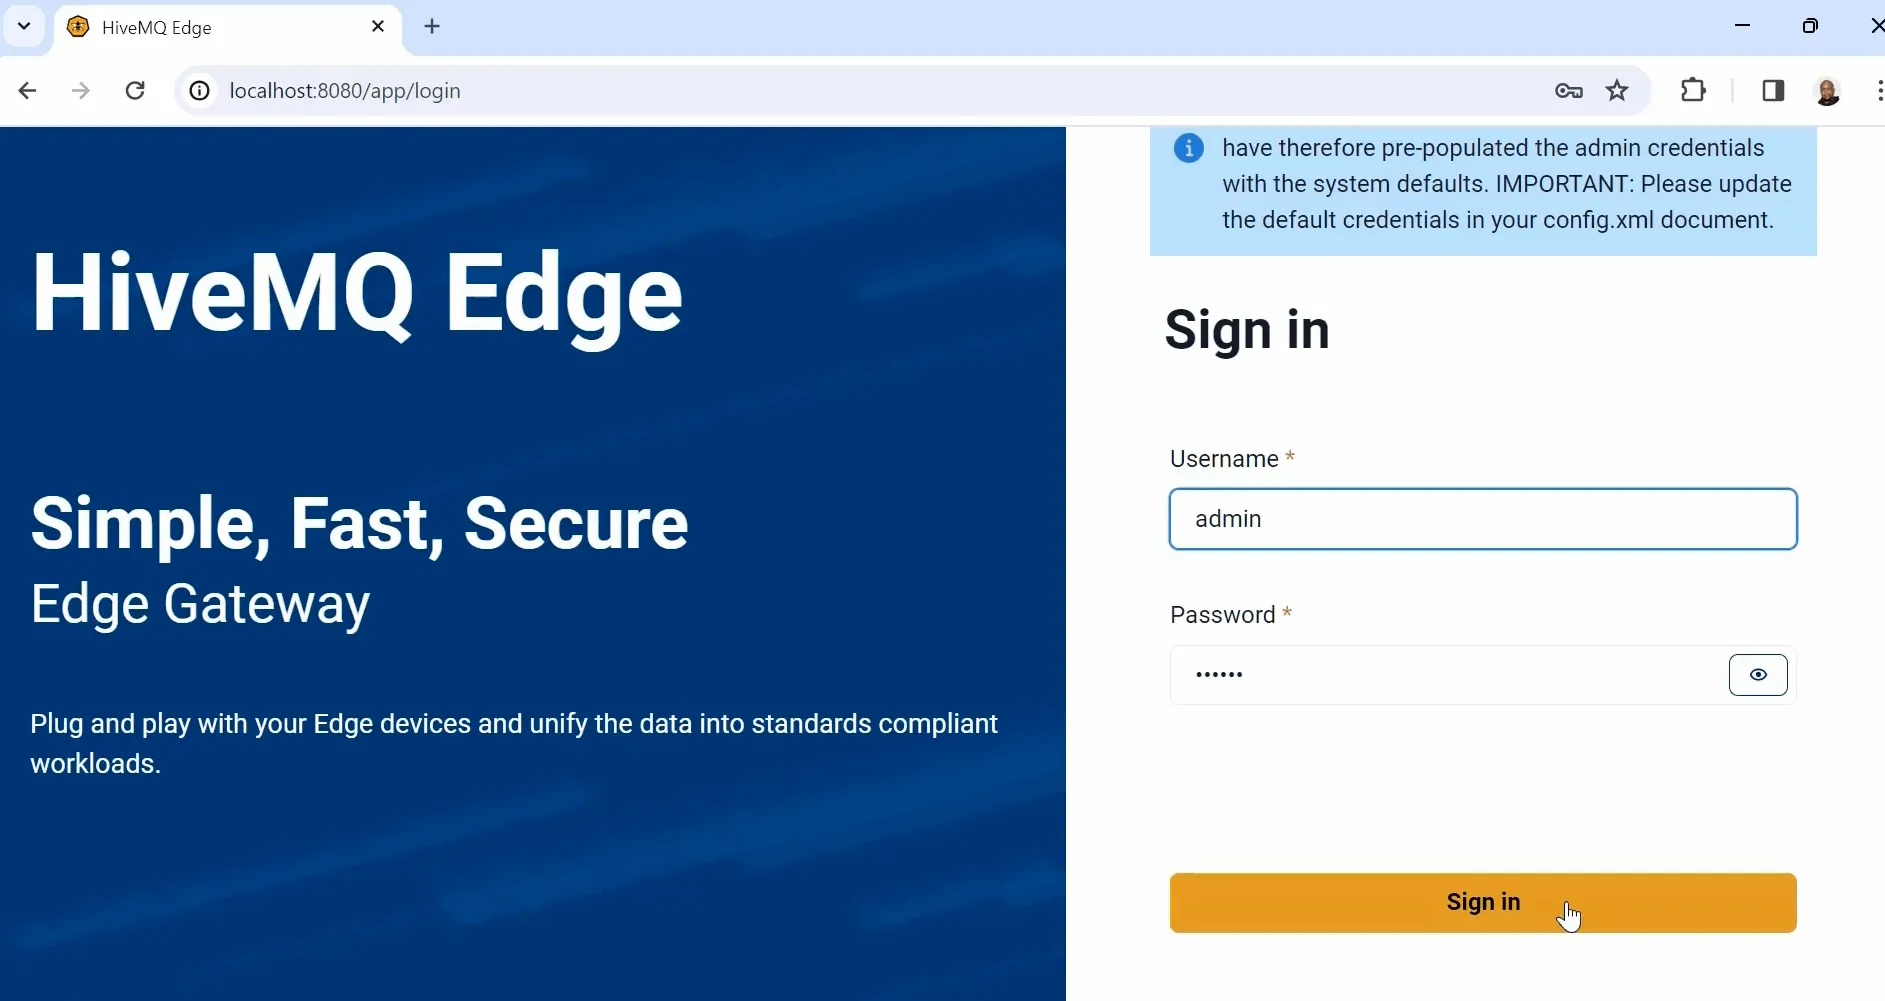 Sign-in to HiveMQ Edge